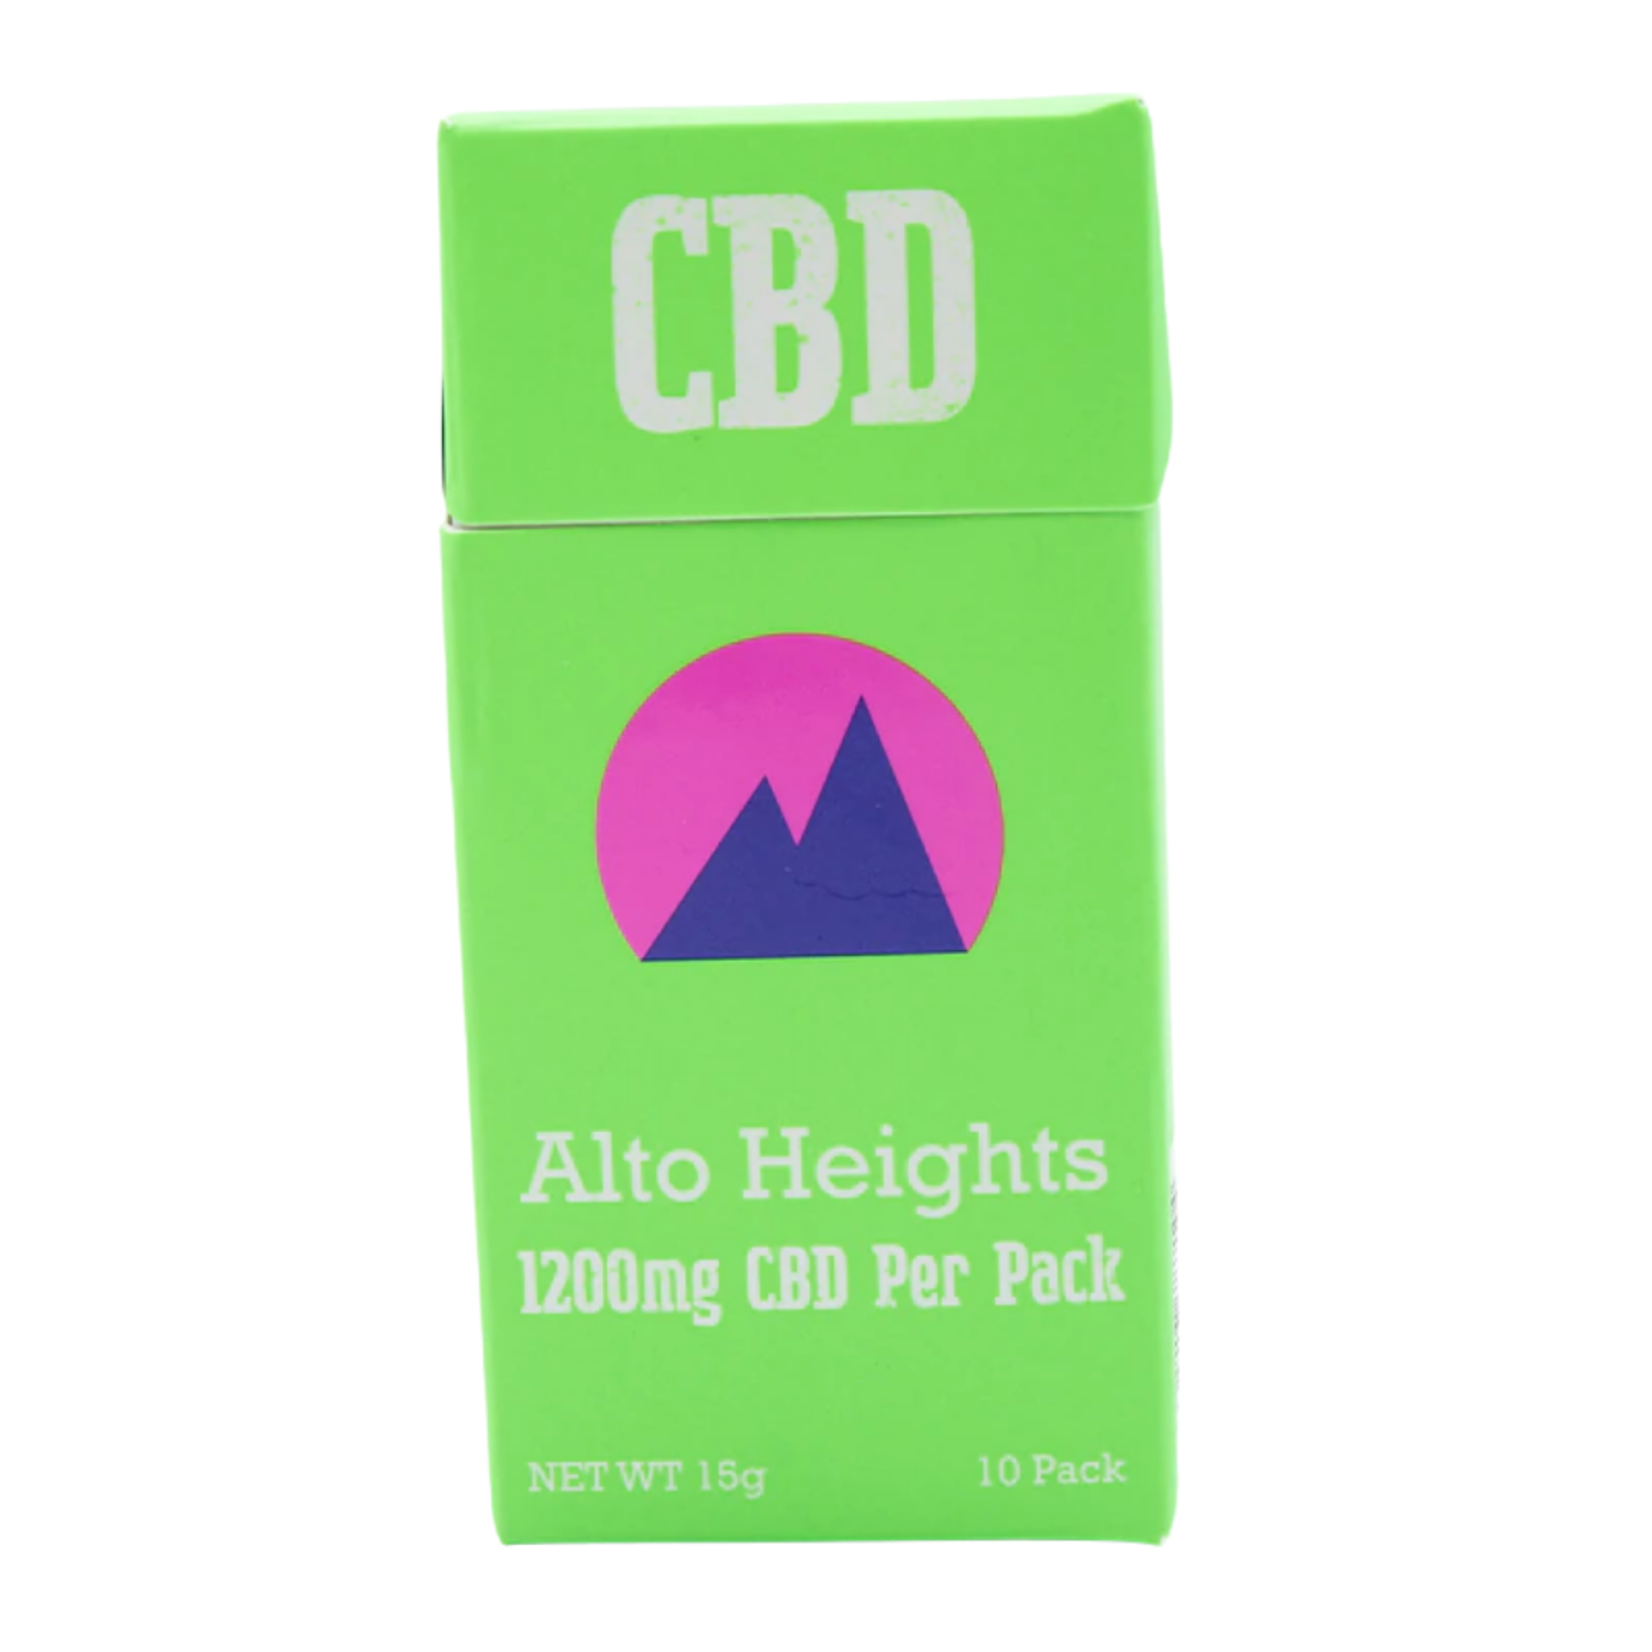 Alto Heights Alto Heights CBD ONLY Hemp Cigarettes - 10-Pack